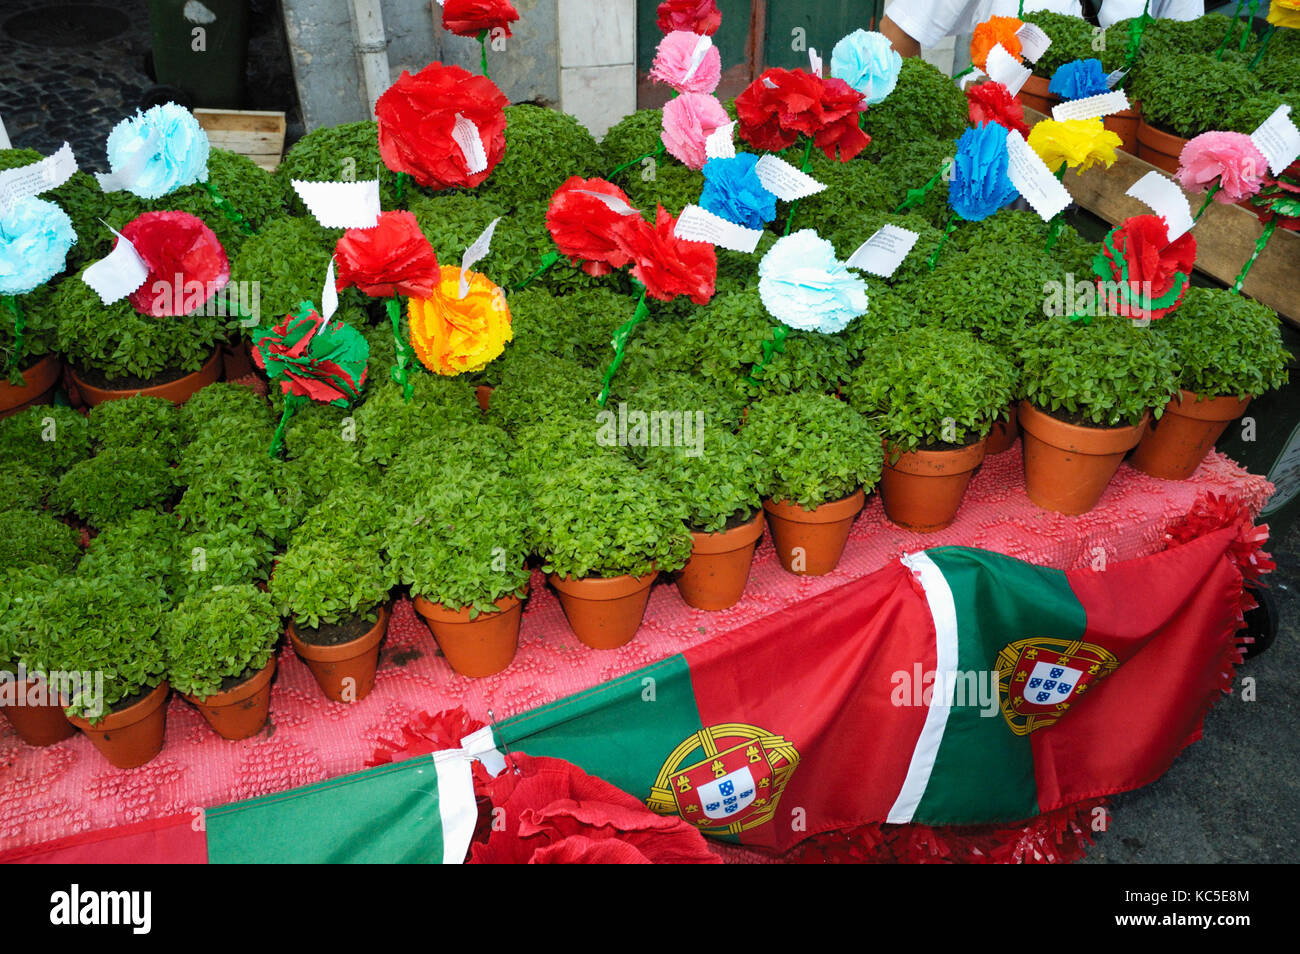 Manjericos (basil), a popular gift during the Santo António festivities in Alfama district. Lisbon, Portugal Stock Photo